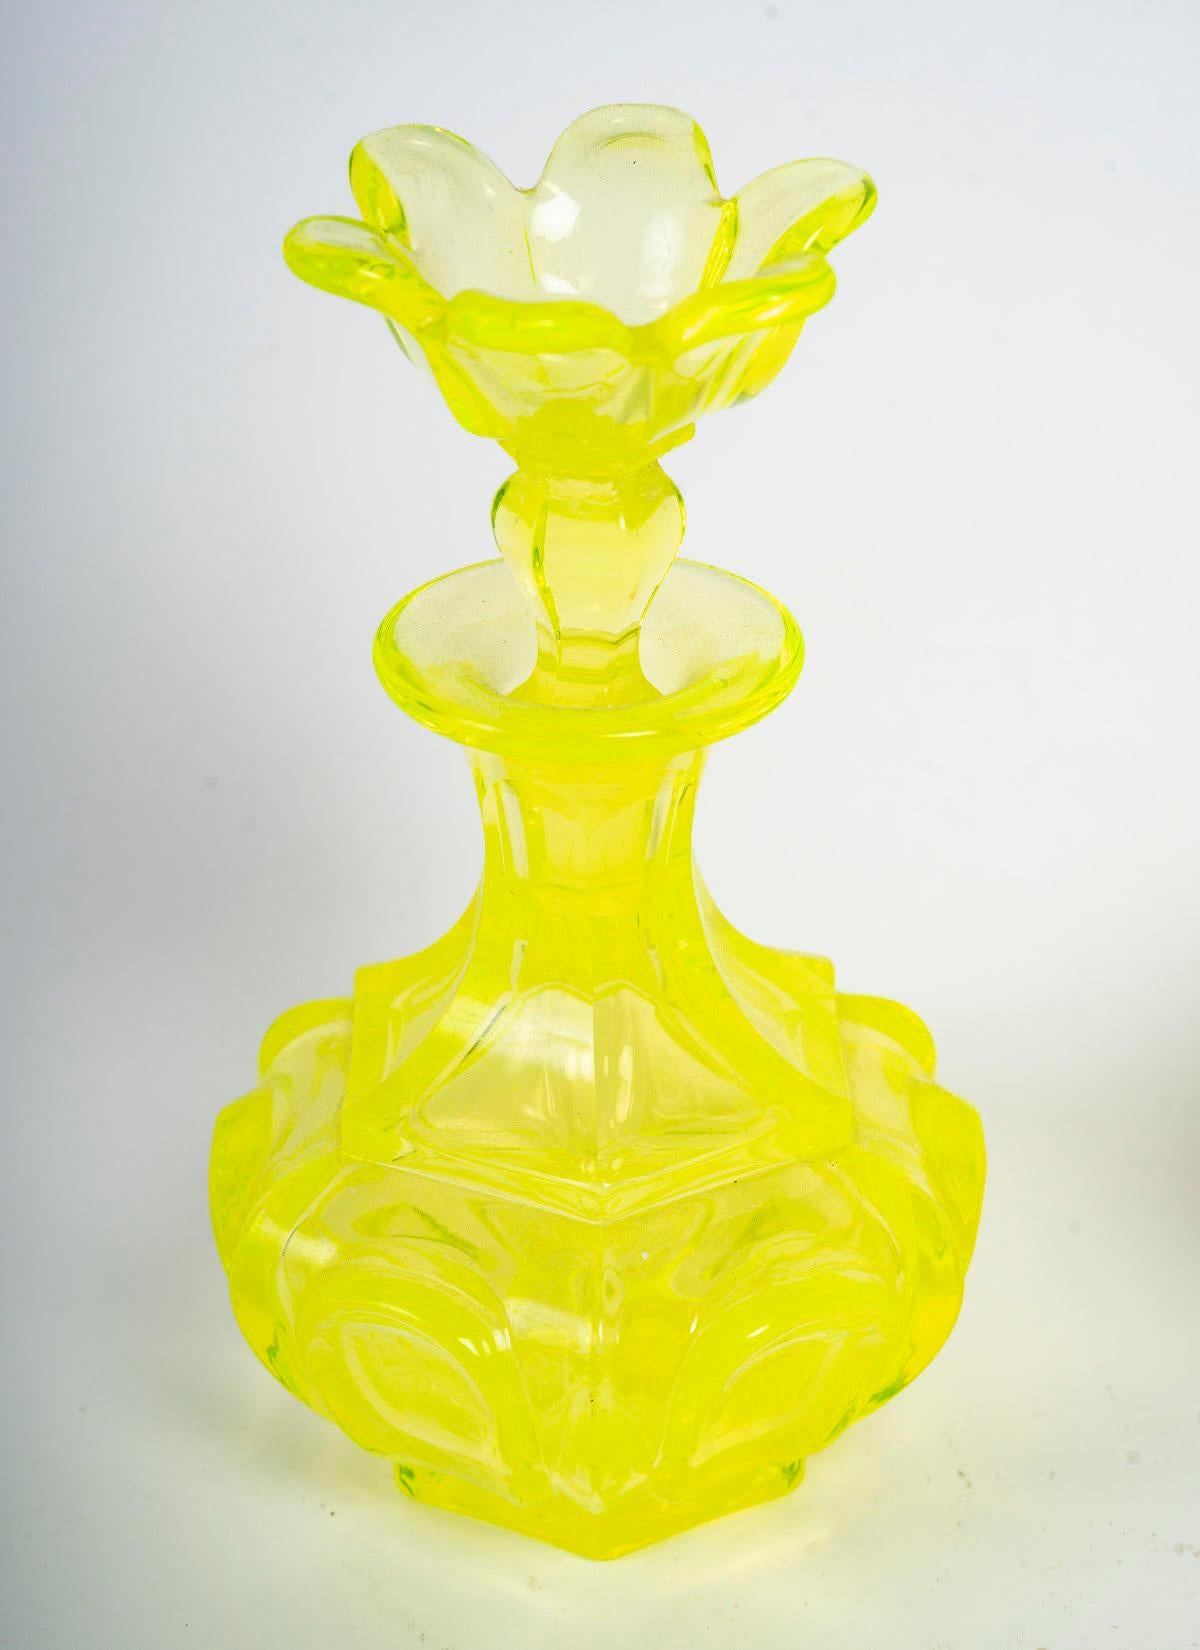 Bottle and 2 glasses in yellow cut Bohemian crystal, 19th century, Napoleon III period.

Bottle and two glasses in yellow cut Bohemian crystal, 19th century, Napoleon III period.
Bottle: H: 15cm D: 9,5cm
Glasses: H: 10cm, D: 4cm